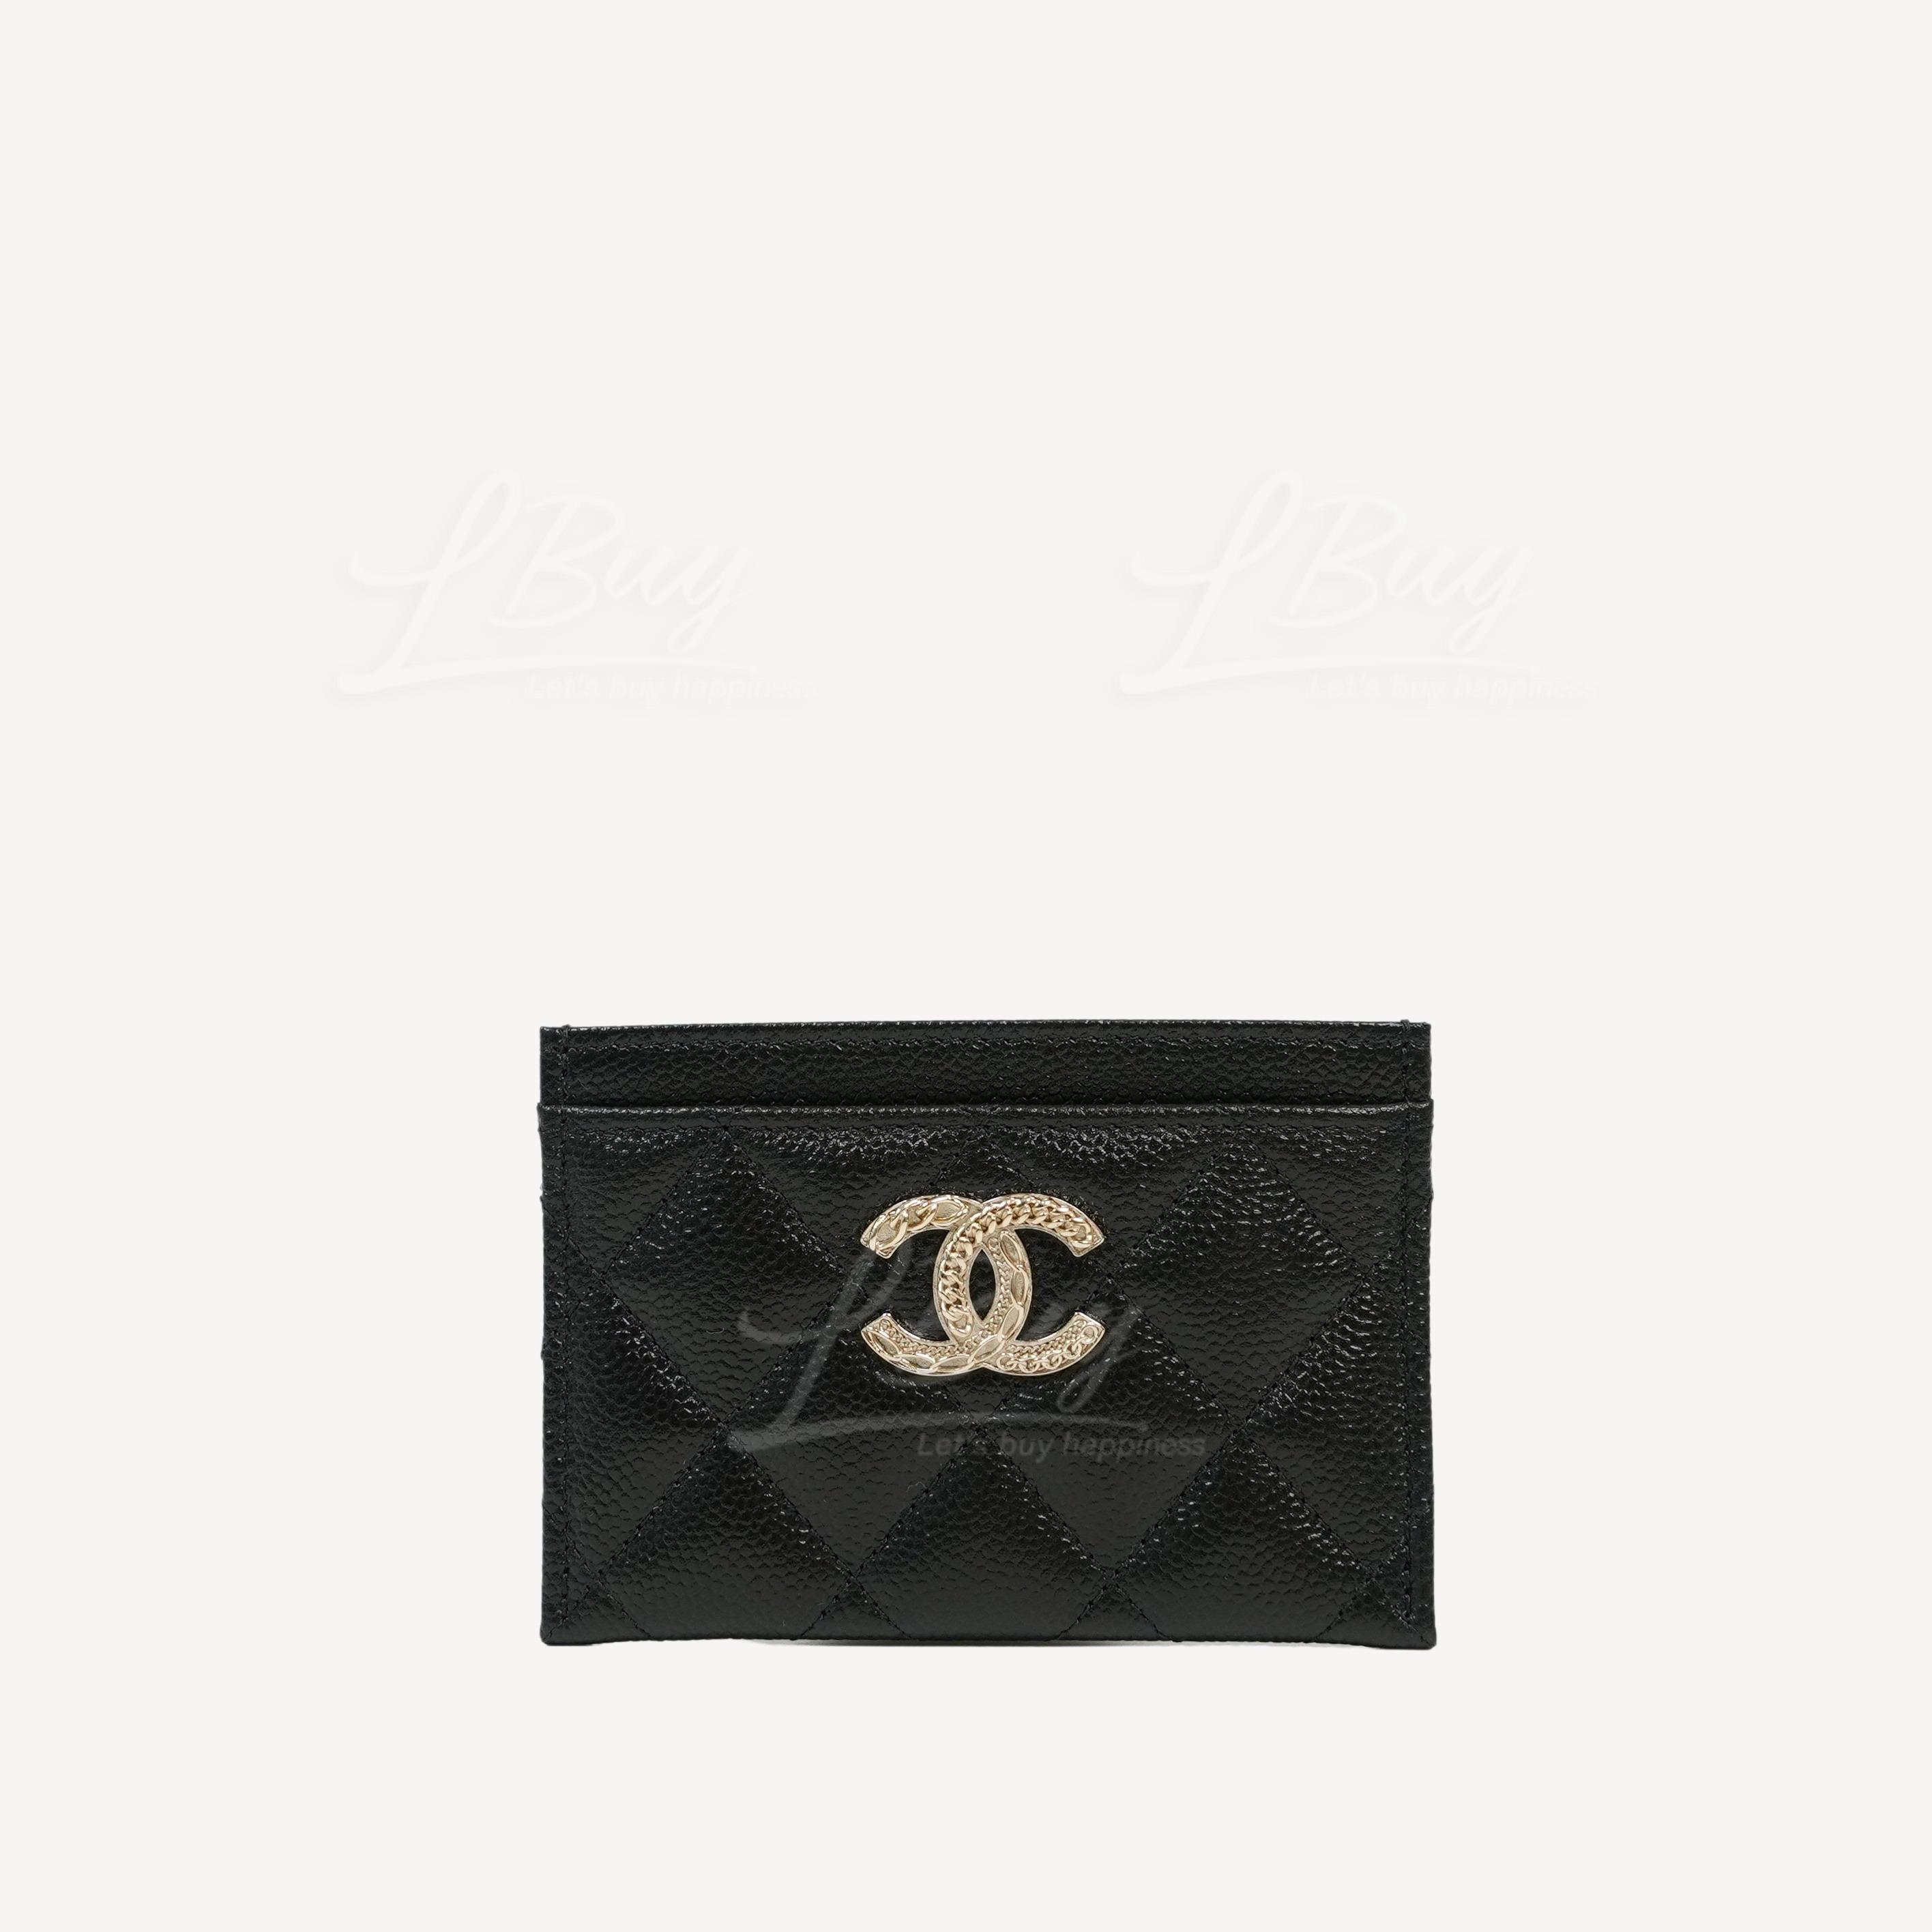 Chanel Classic Cardholder Review - Pros, Cons, and Is It Worth It? -  Isabelle Vita New York